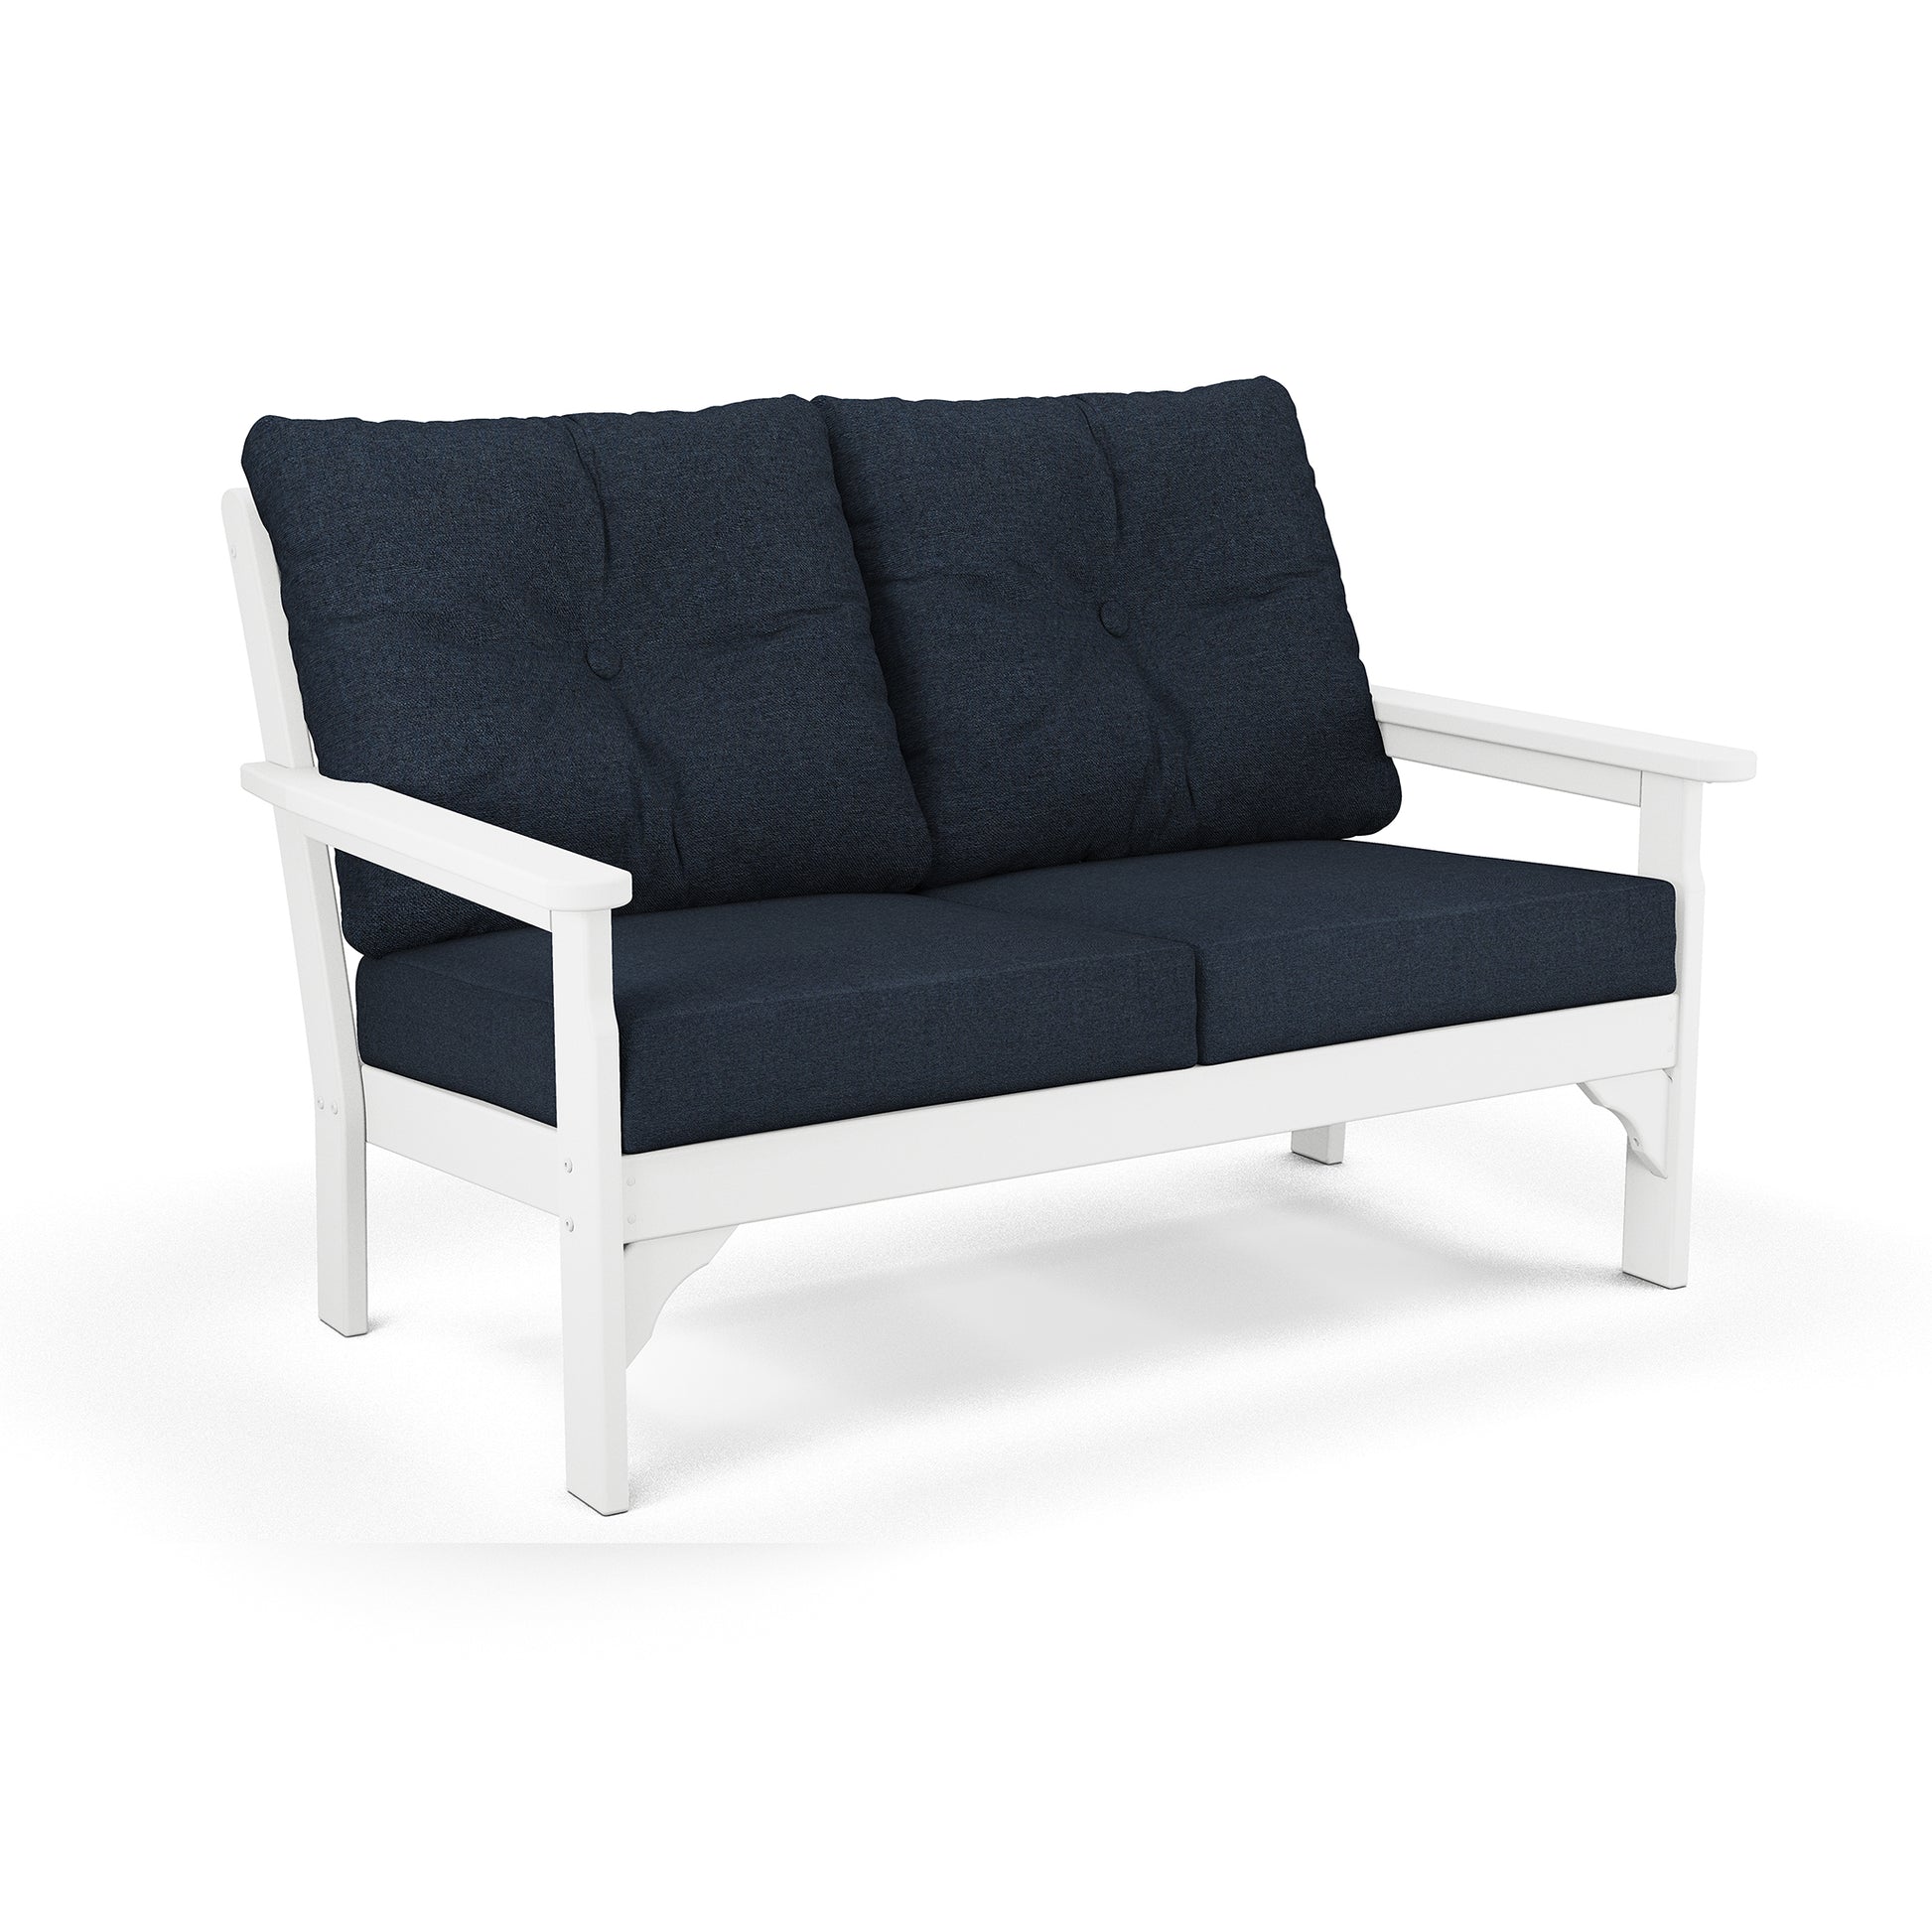 A modern two-seater outdoor sofa with a white POLYWOOD® frame and dark blue cushions, isolated on a white background.